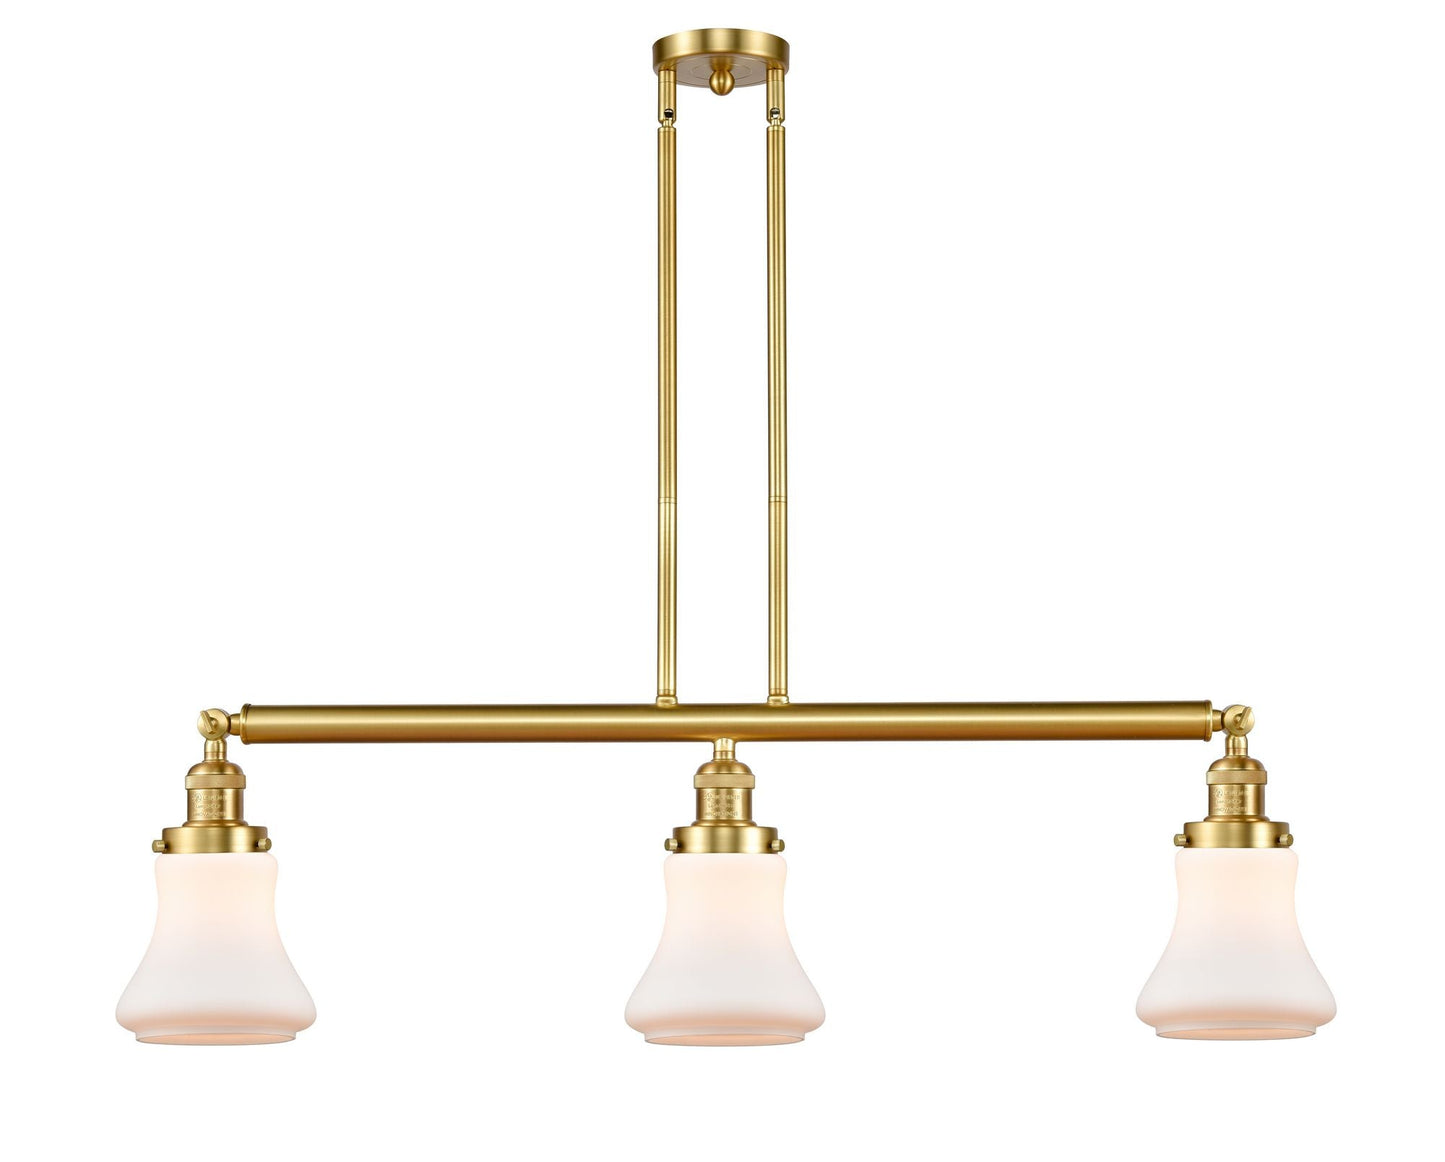 213-SG-G191 3-Light 38.75" Satin Gold Island Light - Matte White Bellmont Glass - LED Bulb - Dimmensions: 38.75 x 6.25 x 11<br>Minimum Height : 20.5<br>Maximum Height : 44.5 - Sloped Ceiling Compatible: Yes